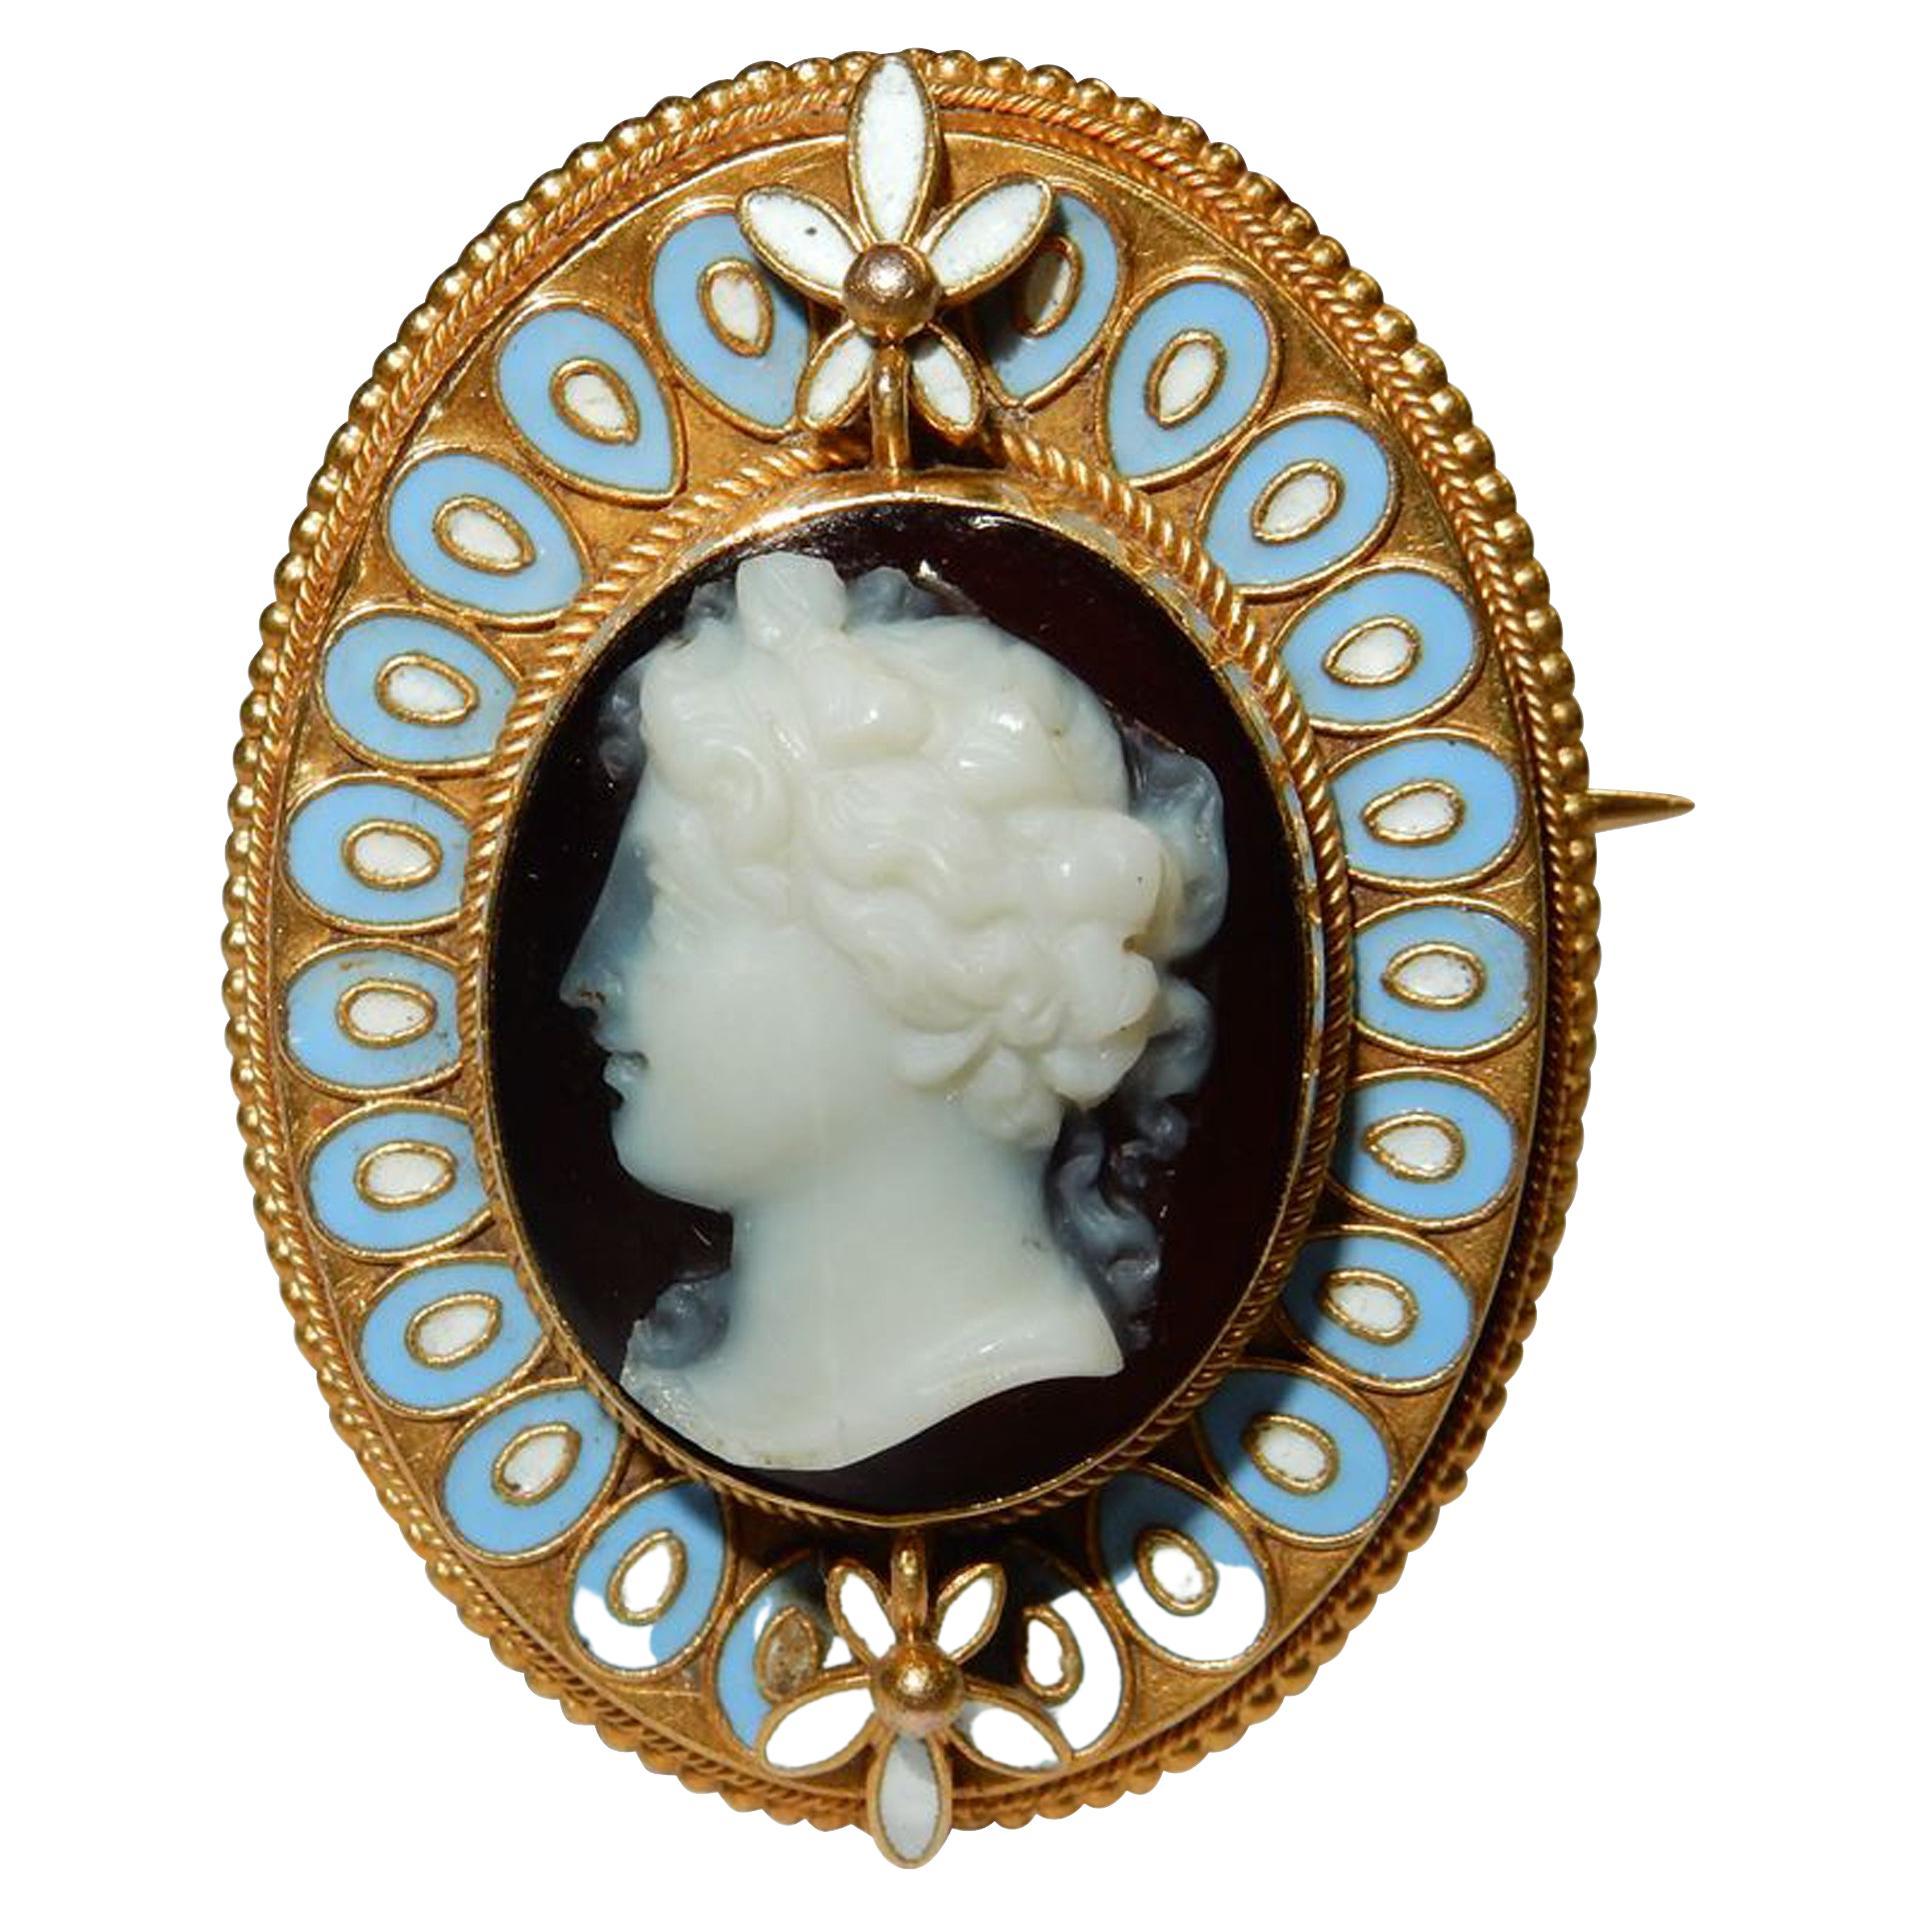 Important Exquisite Rare Antique Hardstone Gold & Enamel Cameo Brooch For Sale